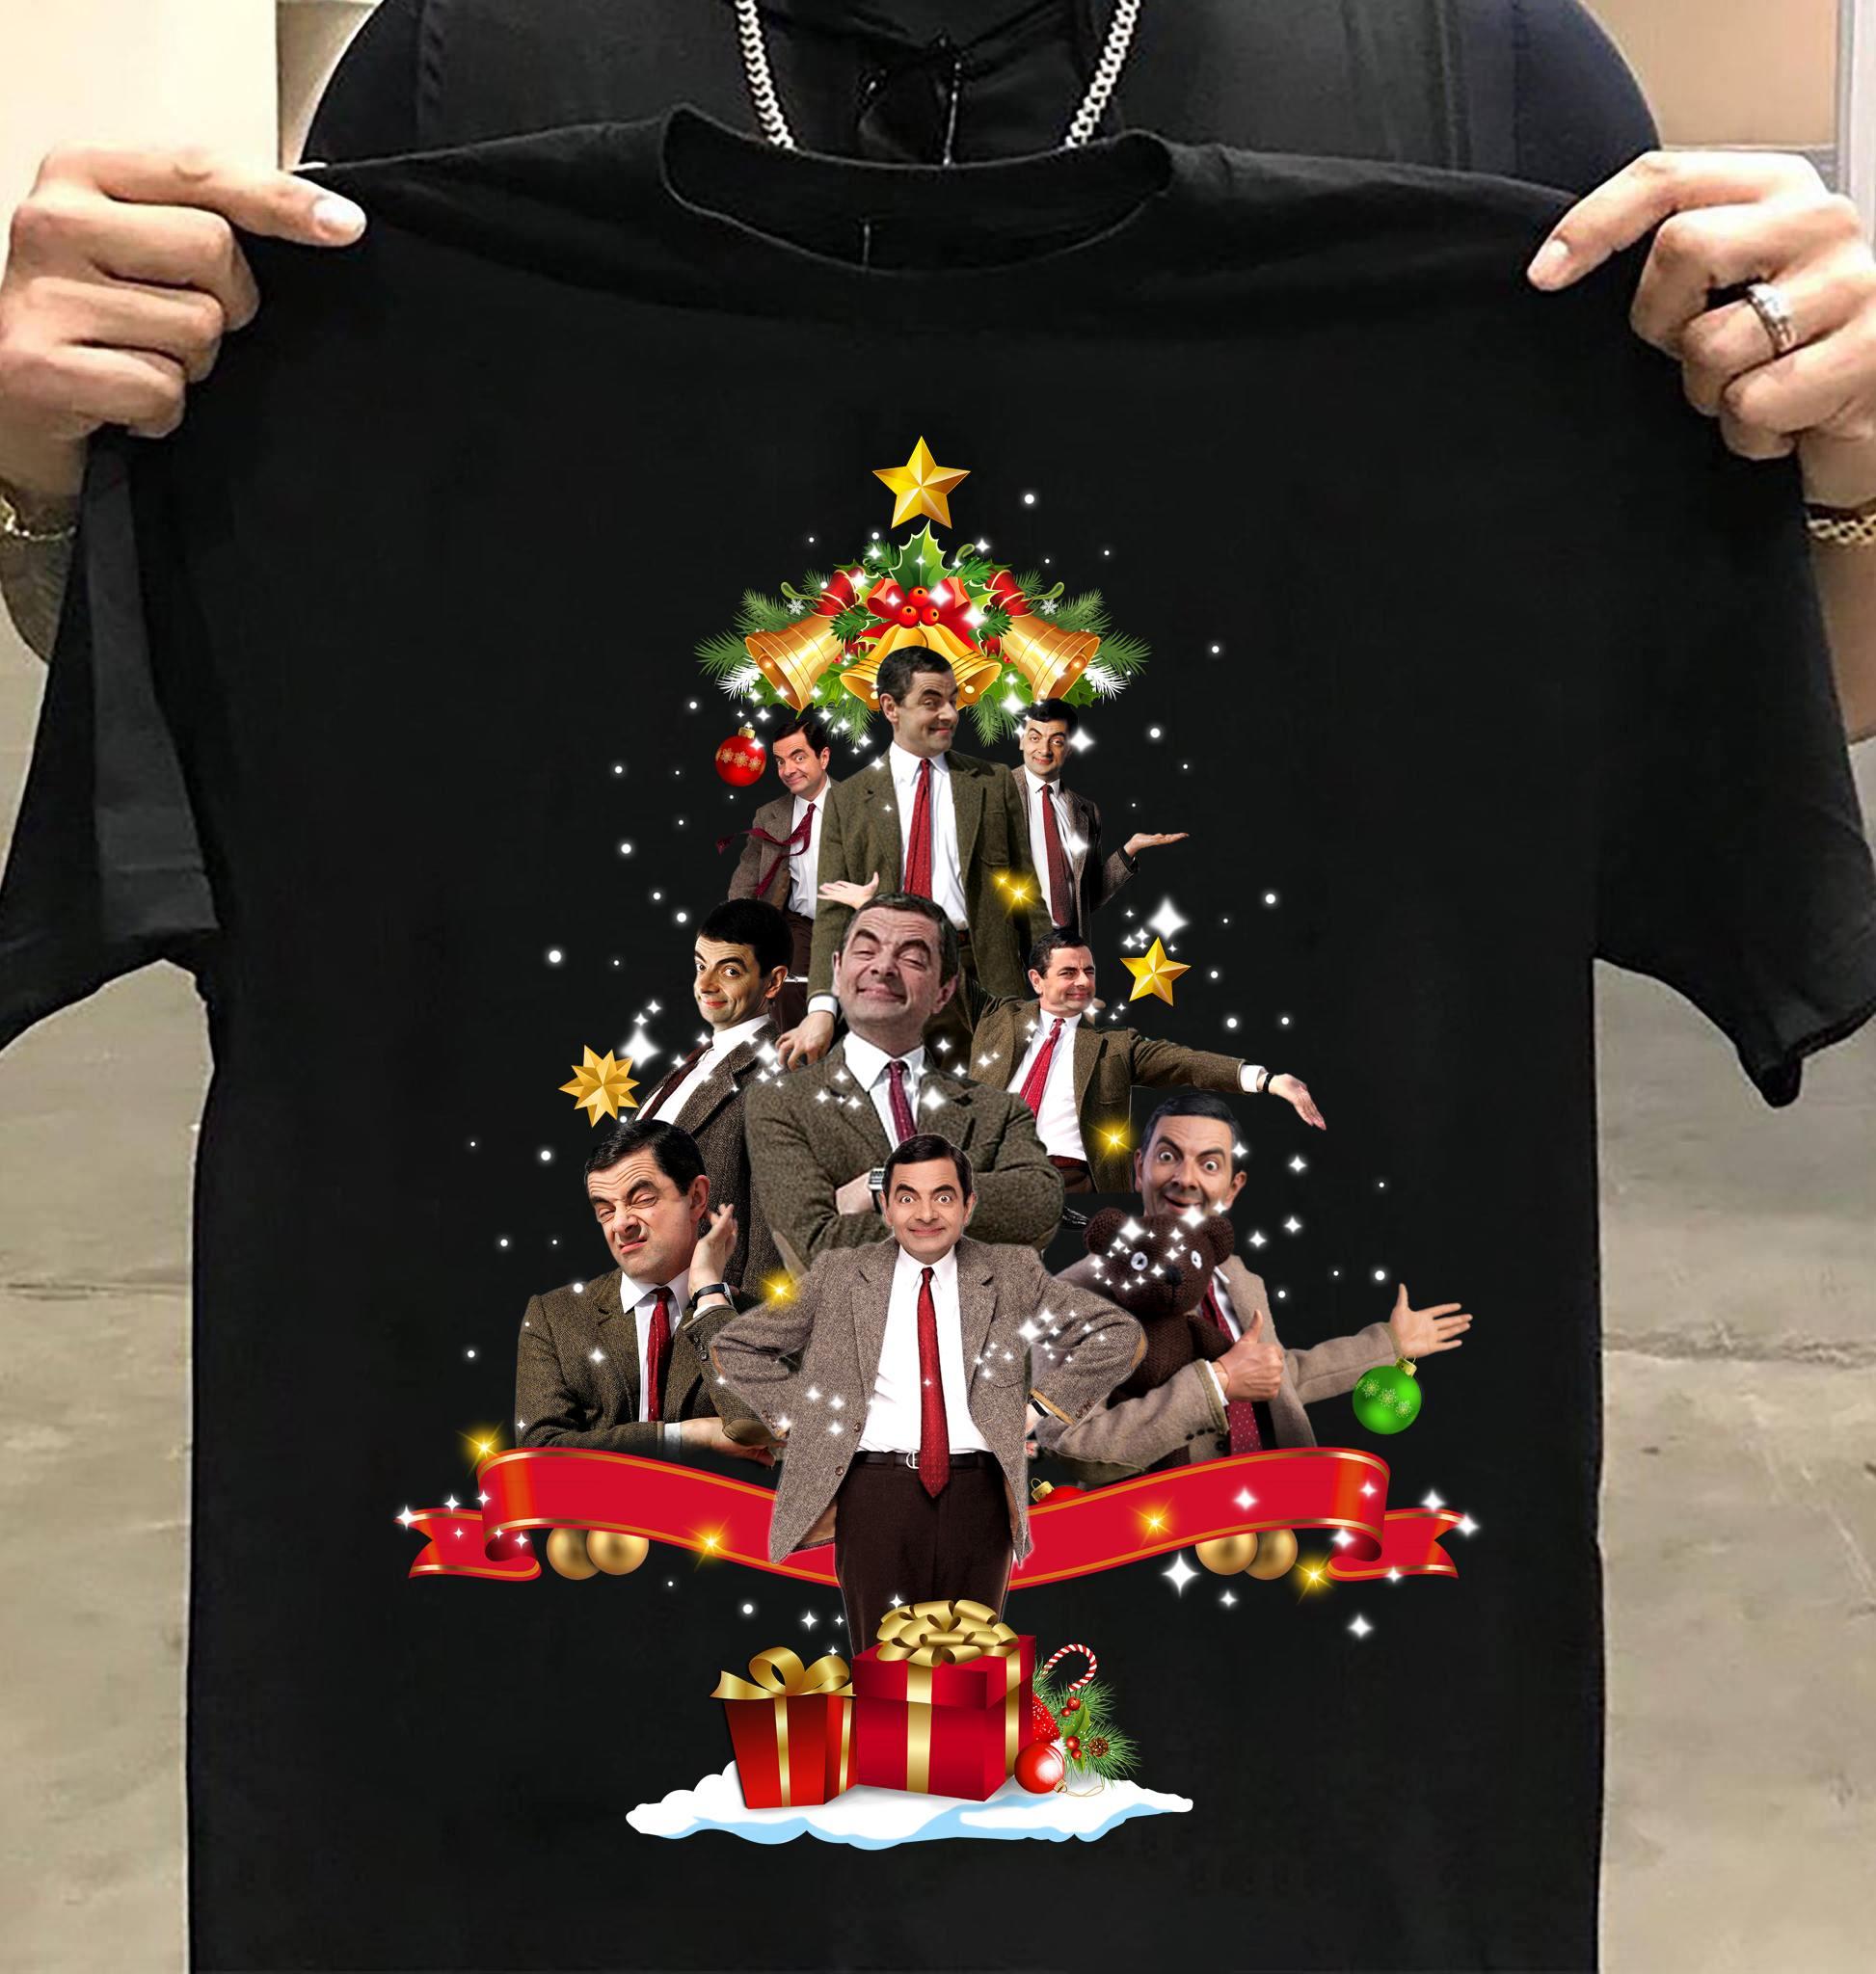 Mr Bean Christmas tree - Mr Bean comedy, Christmas day ugly sweater